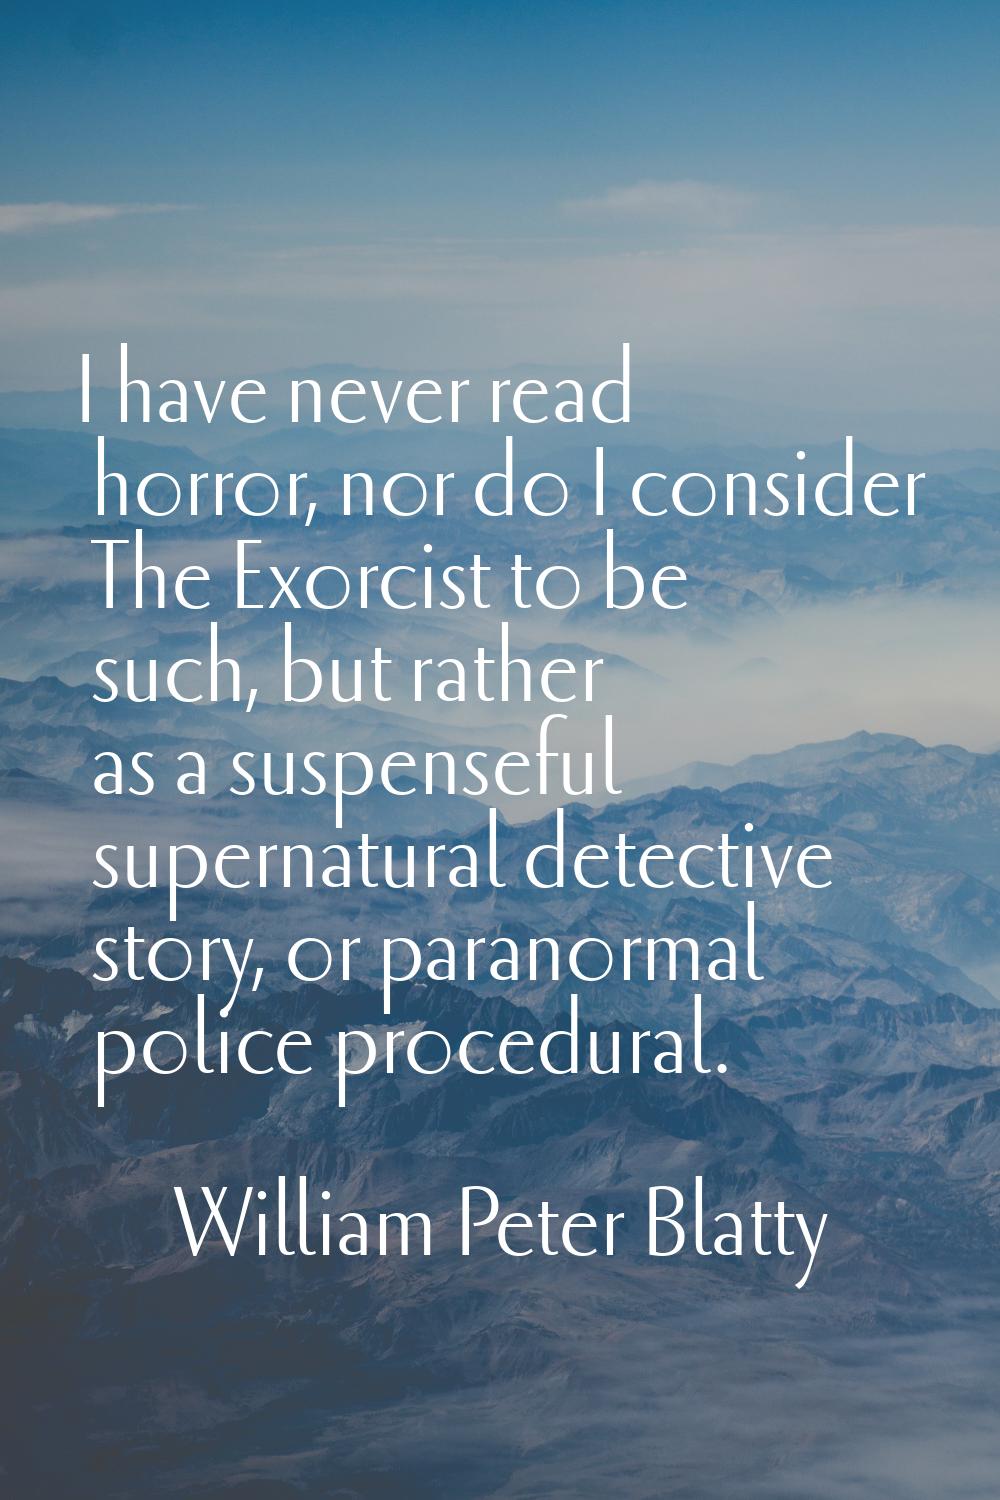 I have never read horror, nor do I consider The Exorcist to be such, but rather as a suspenseful su